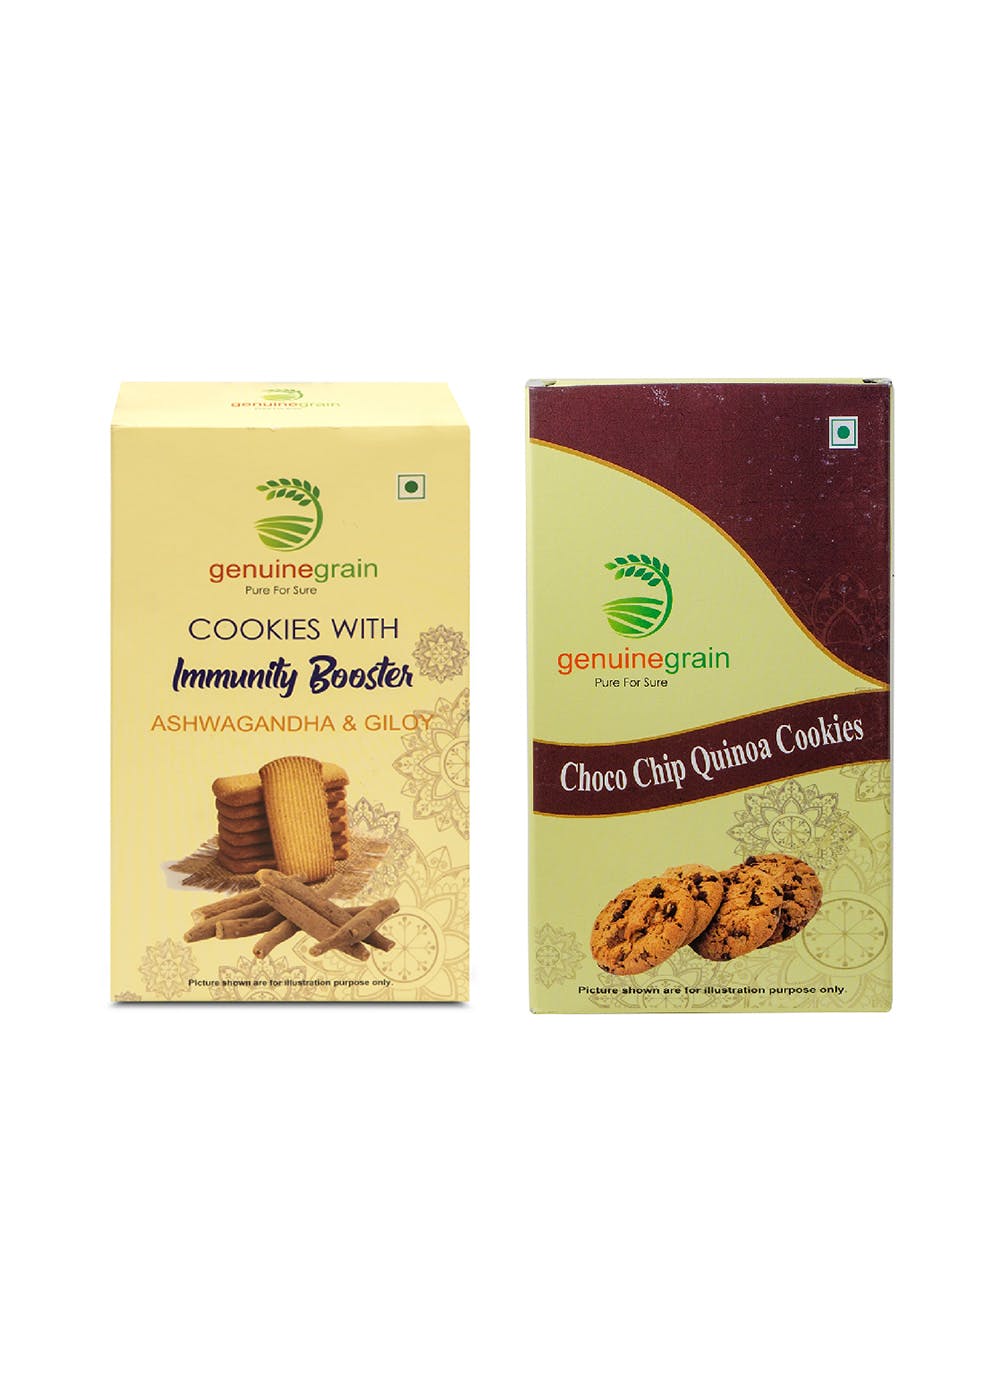 Ashwagandha Giloy Cookies and Choco Chip Quinoa Cookies Combo